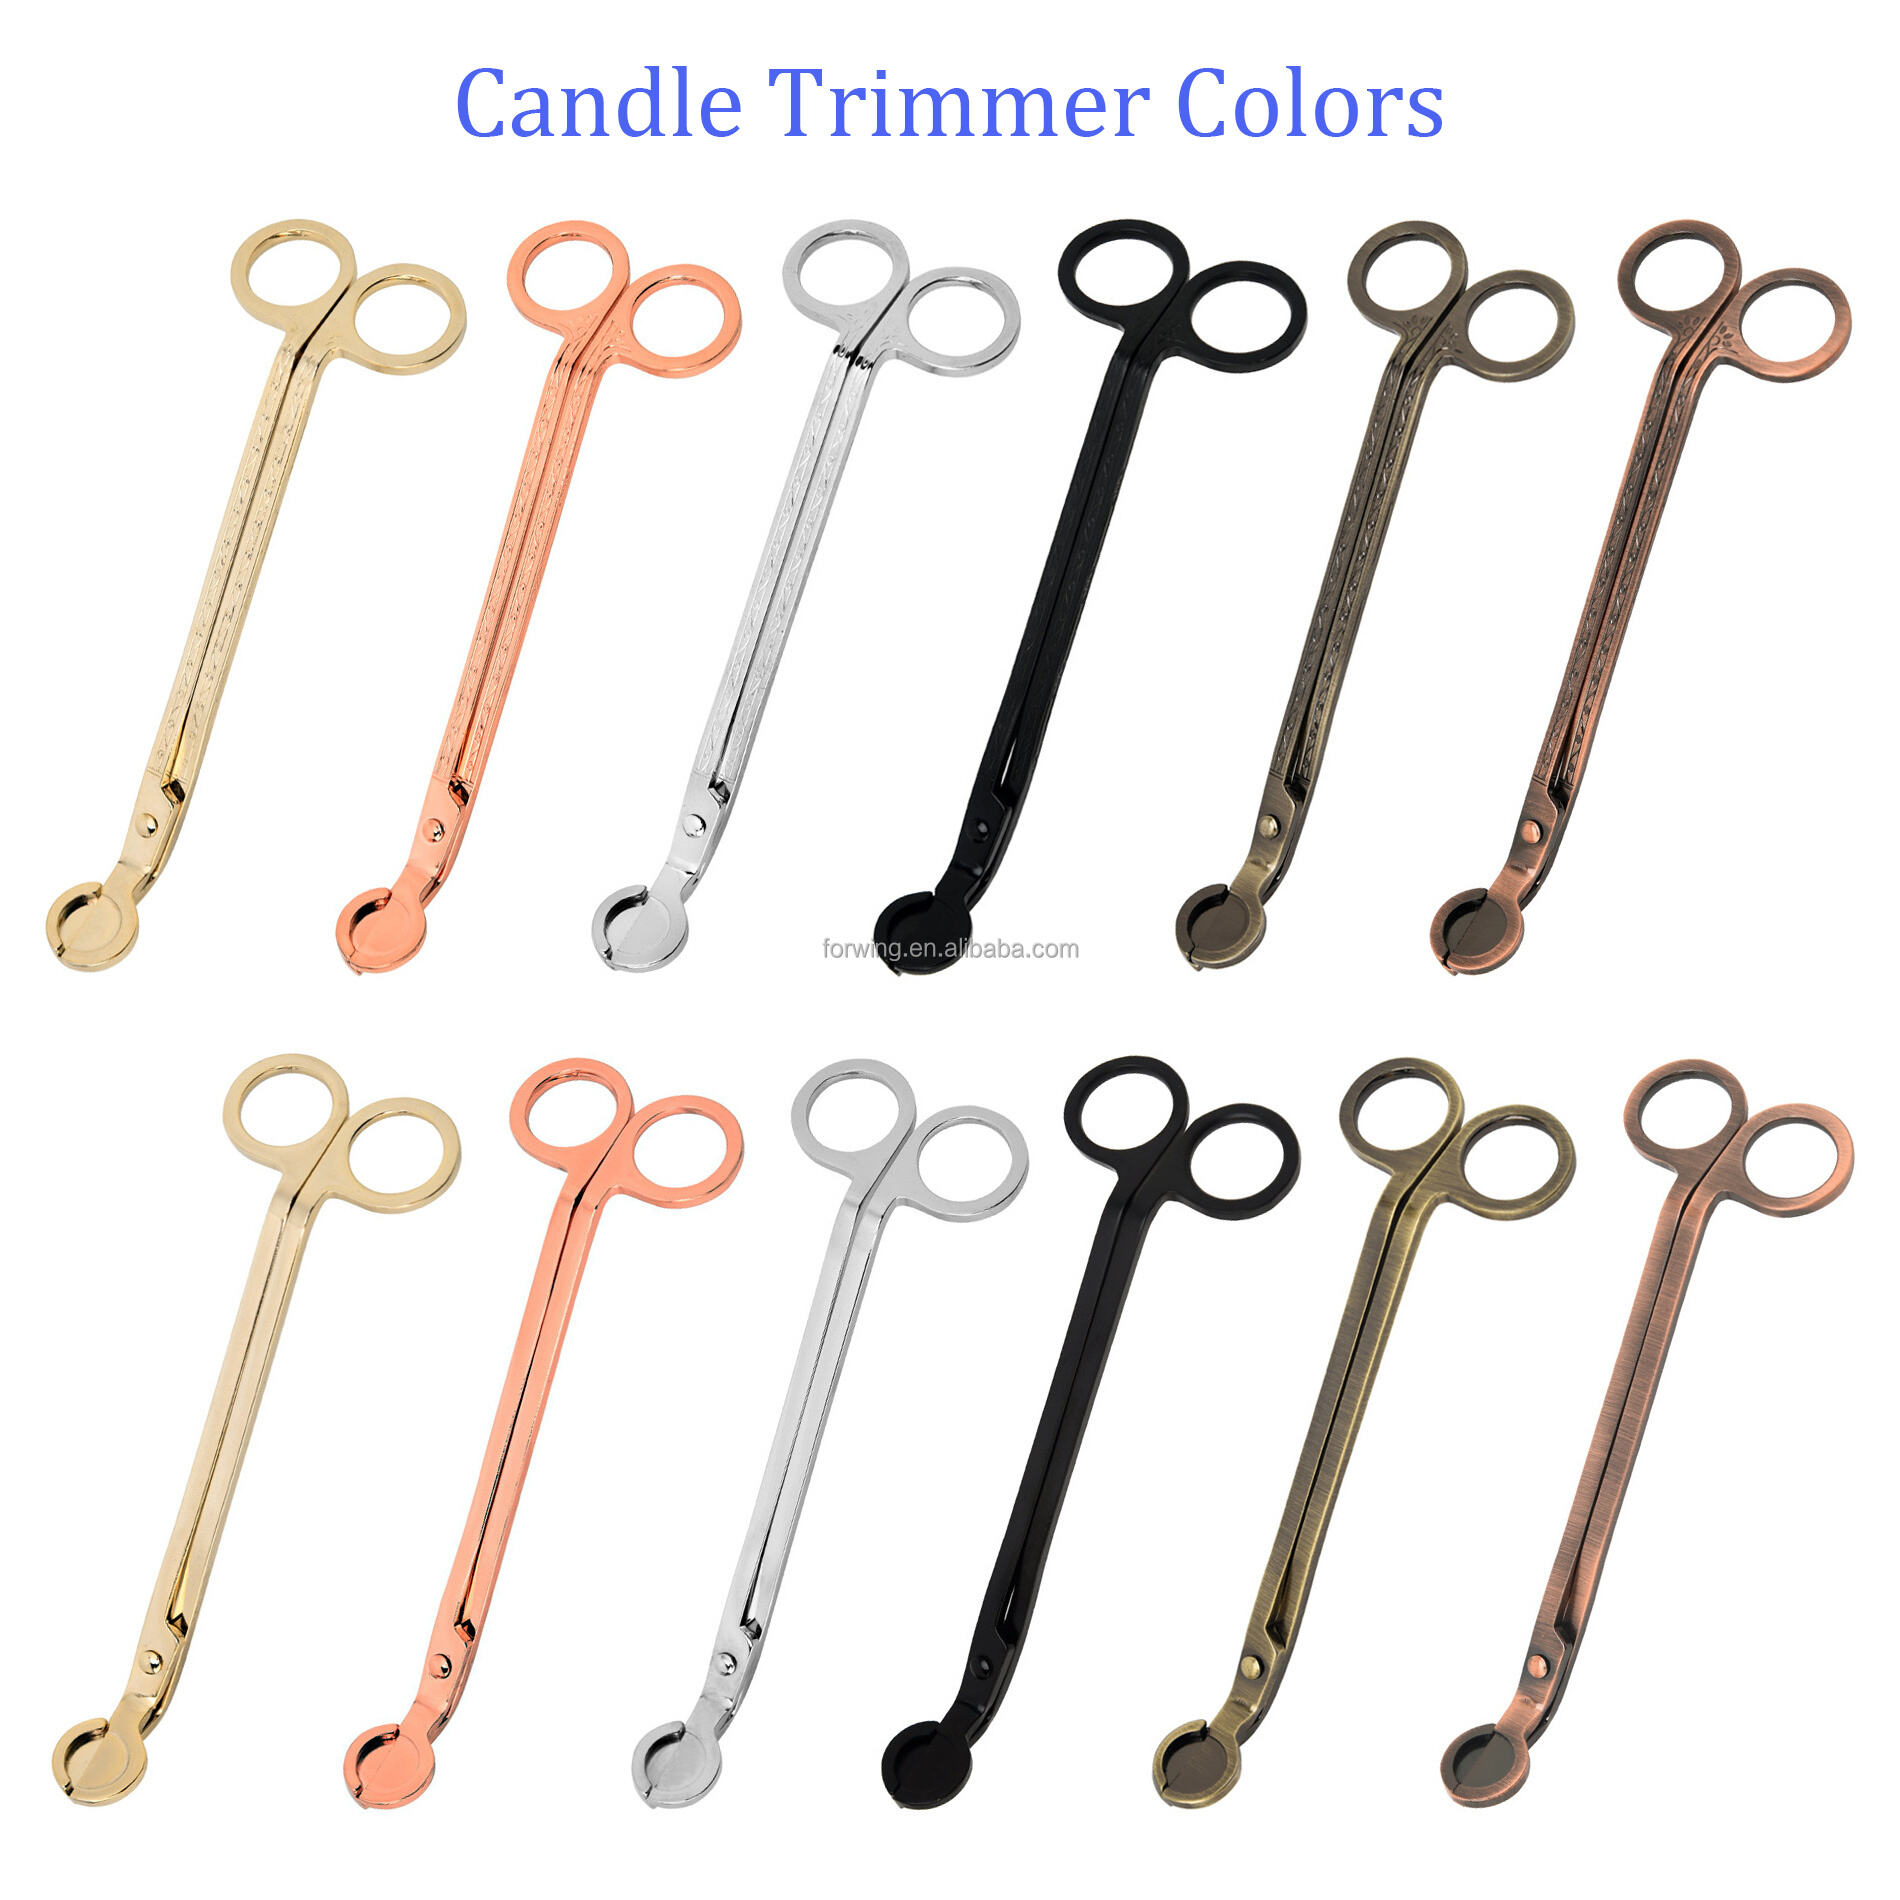 Candle scissors custom laser logo wick trimmer cutter stainless steel shears candle care tools kits candle accessory details